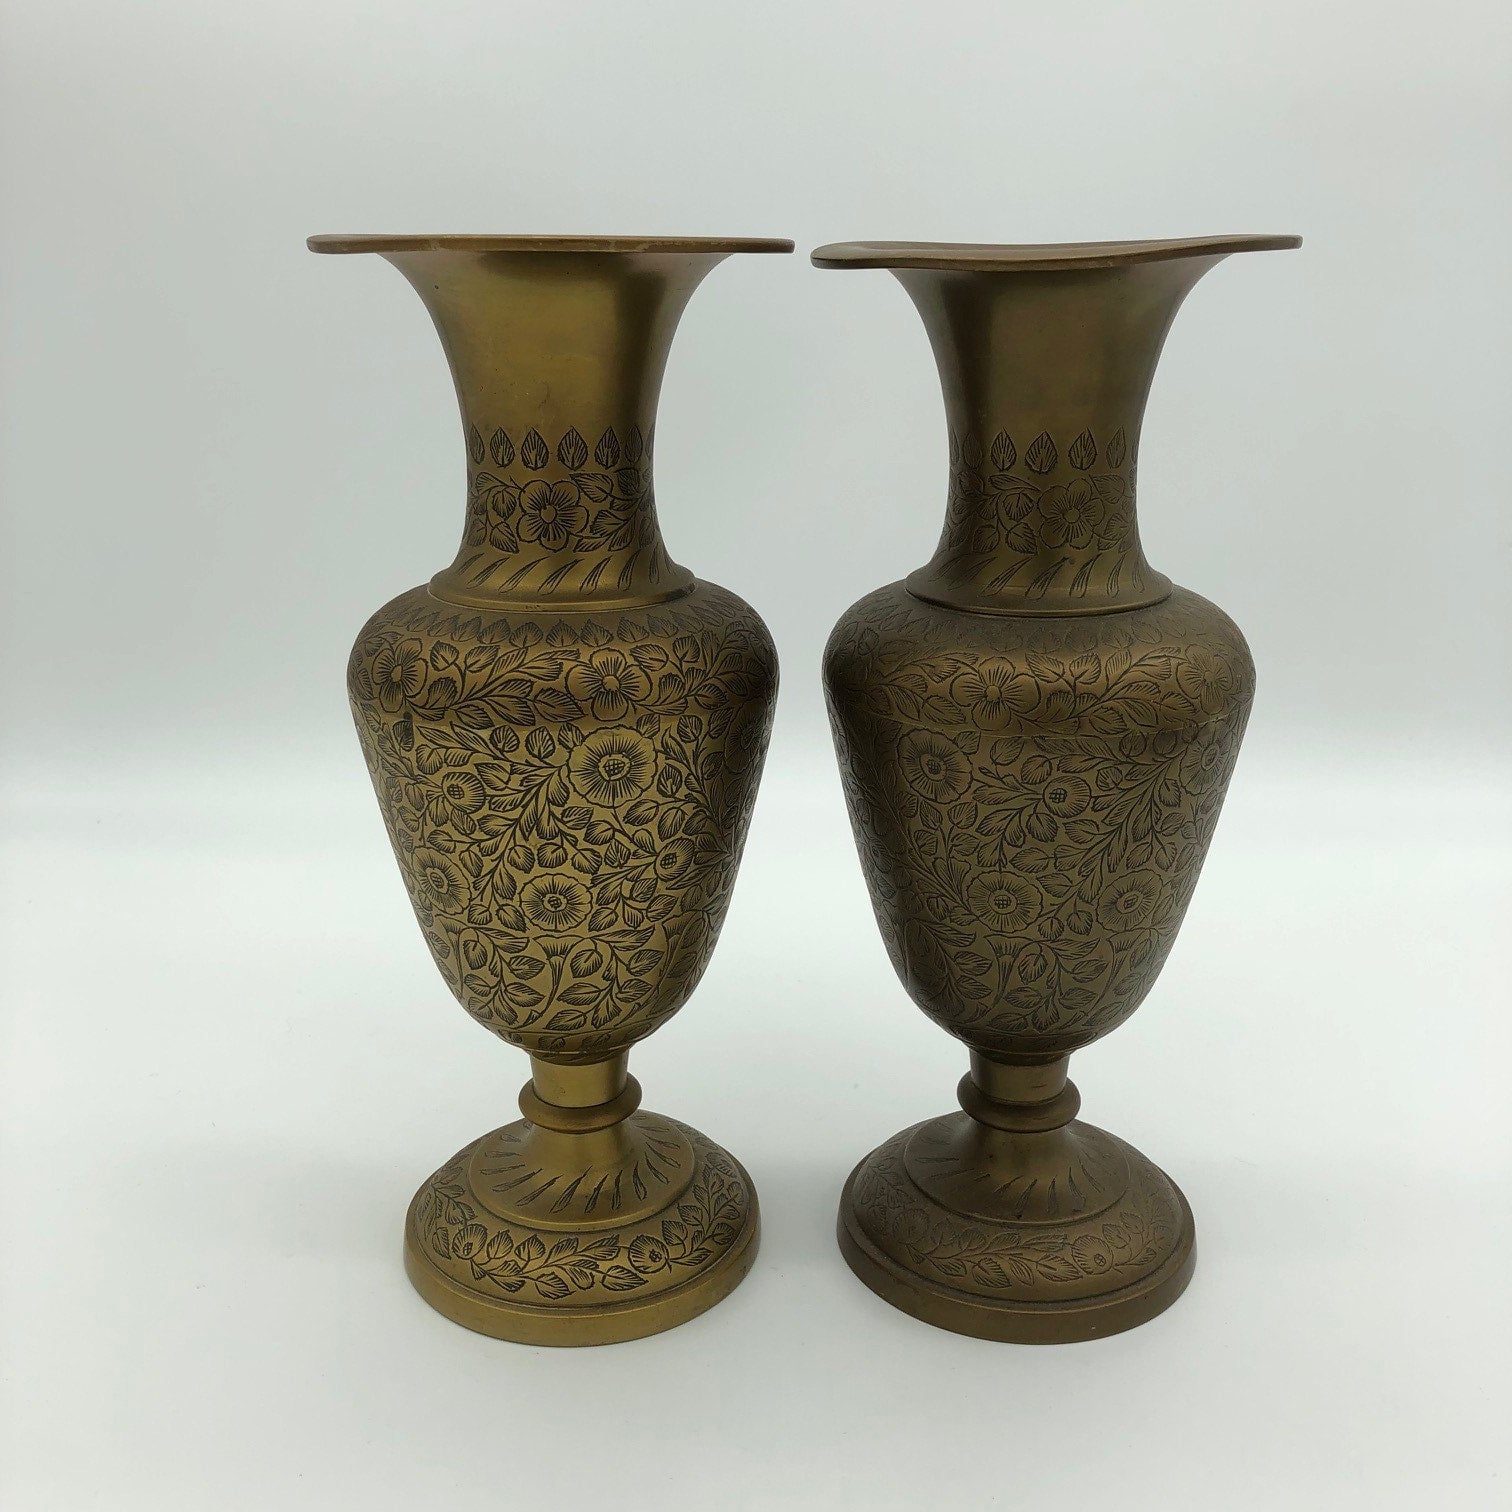 Pair of Vintage Solid Brass Etched Vases made in India